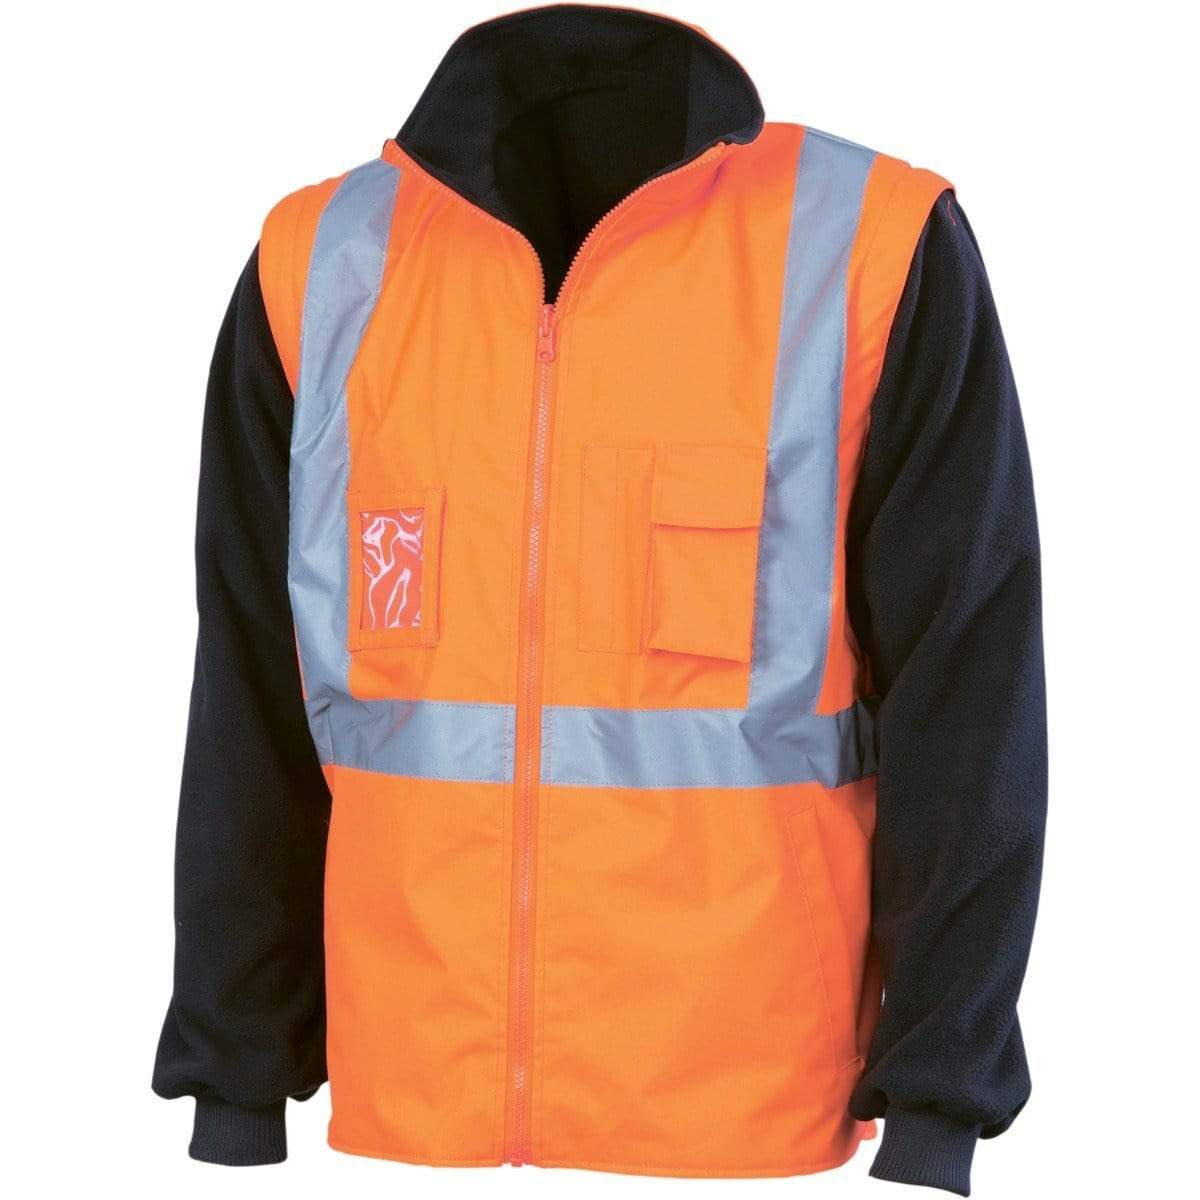 Dnc Workwear Hi-vis 4-in-1 Zip Off Sleeve Reversible Vest, ‘x’ Back With Additional Tape On Tail - 3990 Work Wear DNC Workwear Orange/Navy XS 